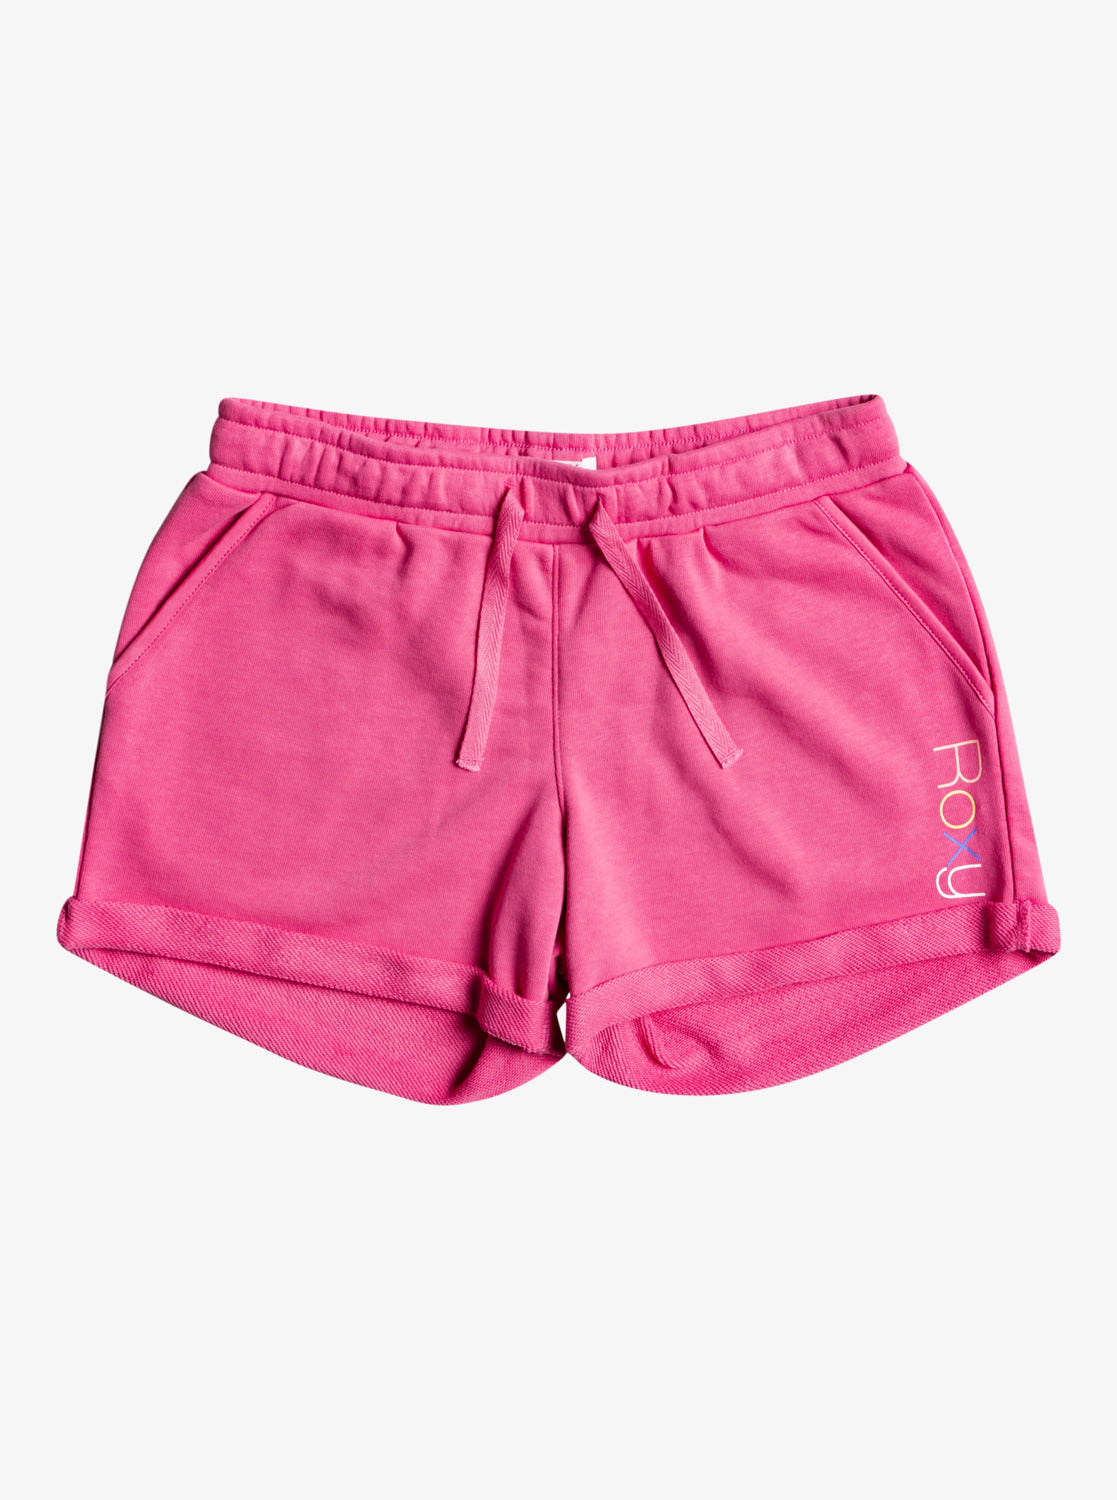 Roxy Happiness Forever Sweat Shorts in Sunshine